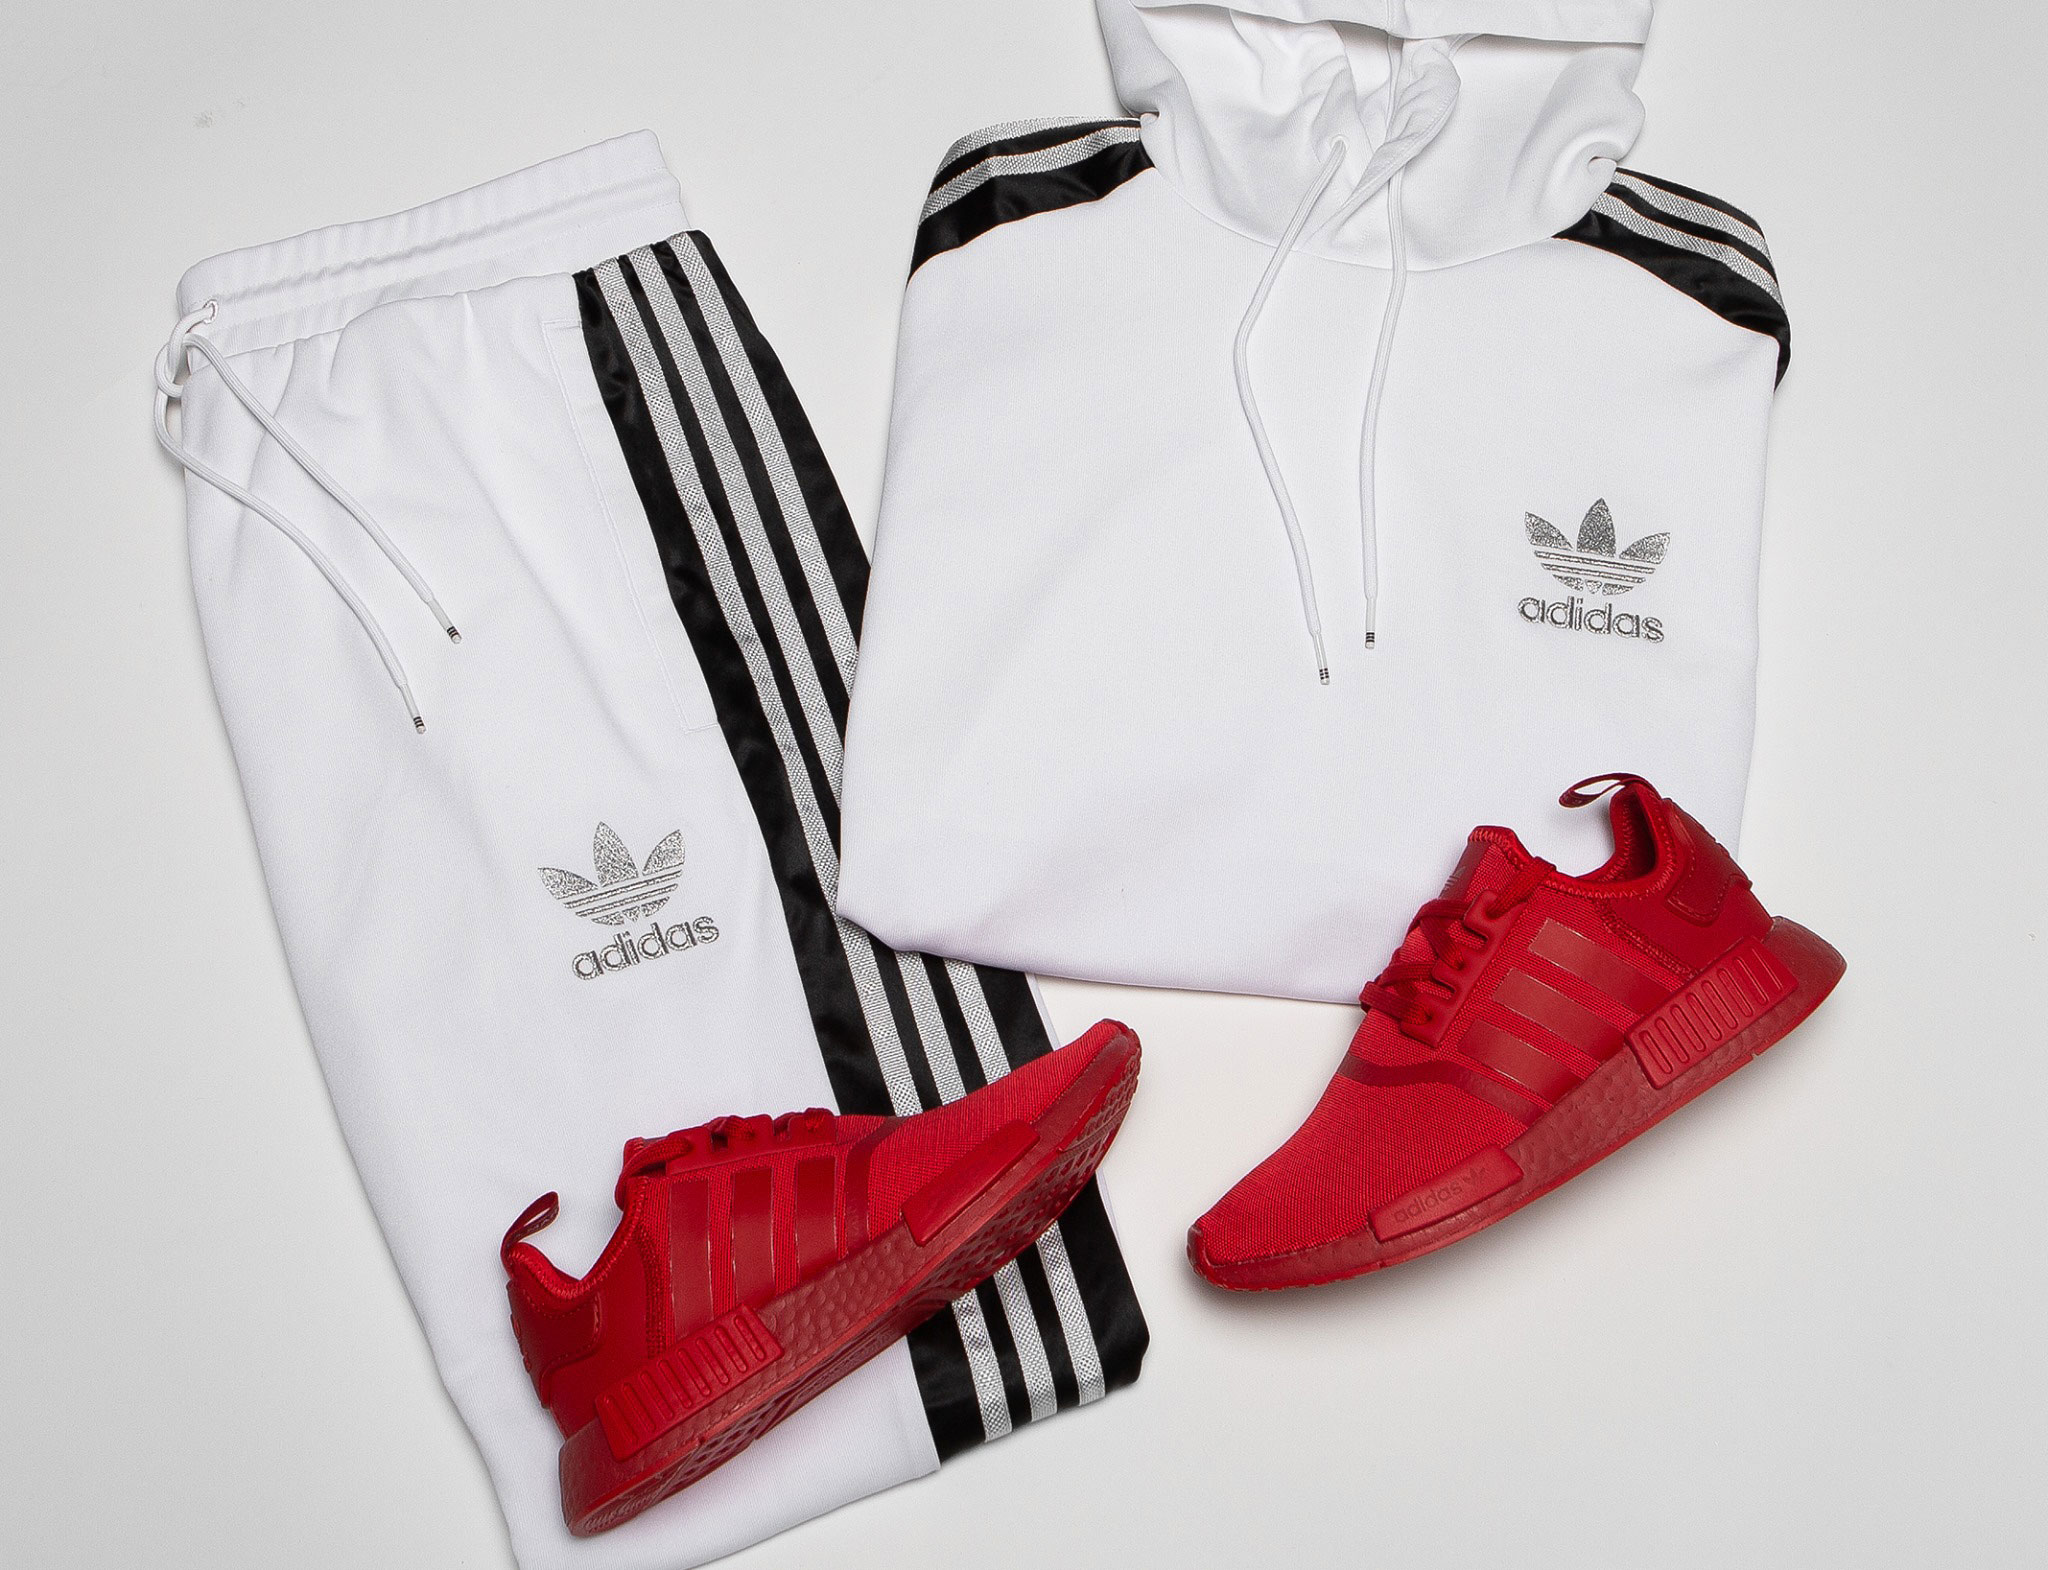 triple red nmds